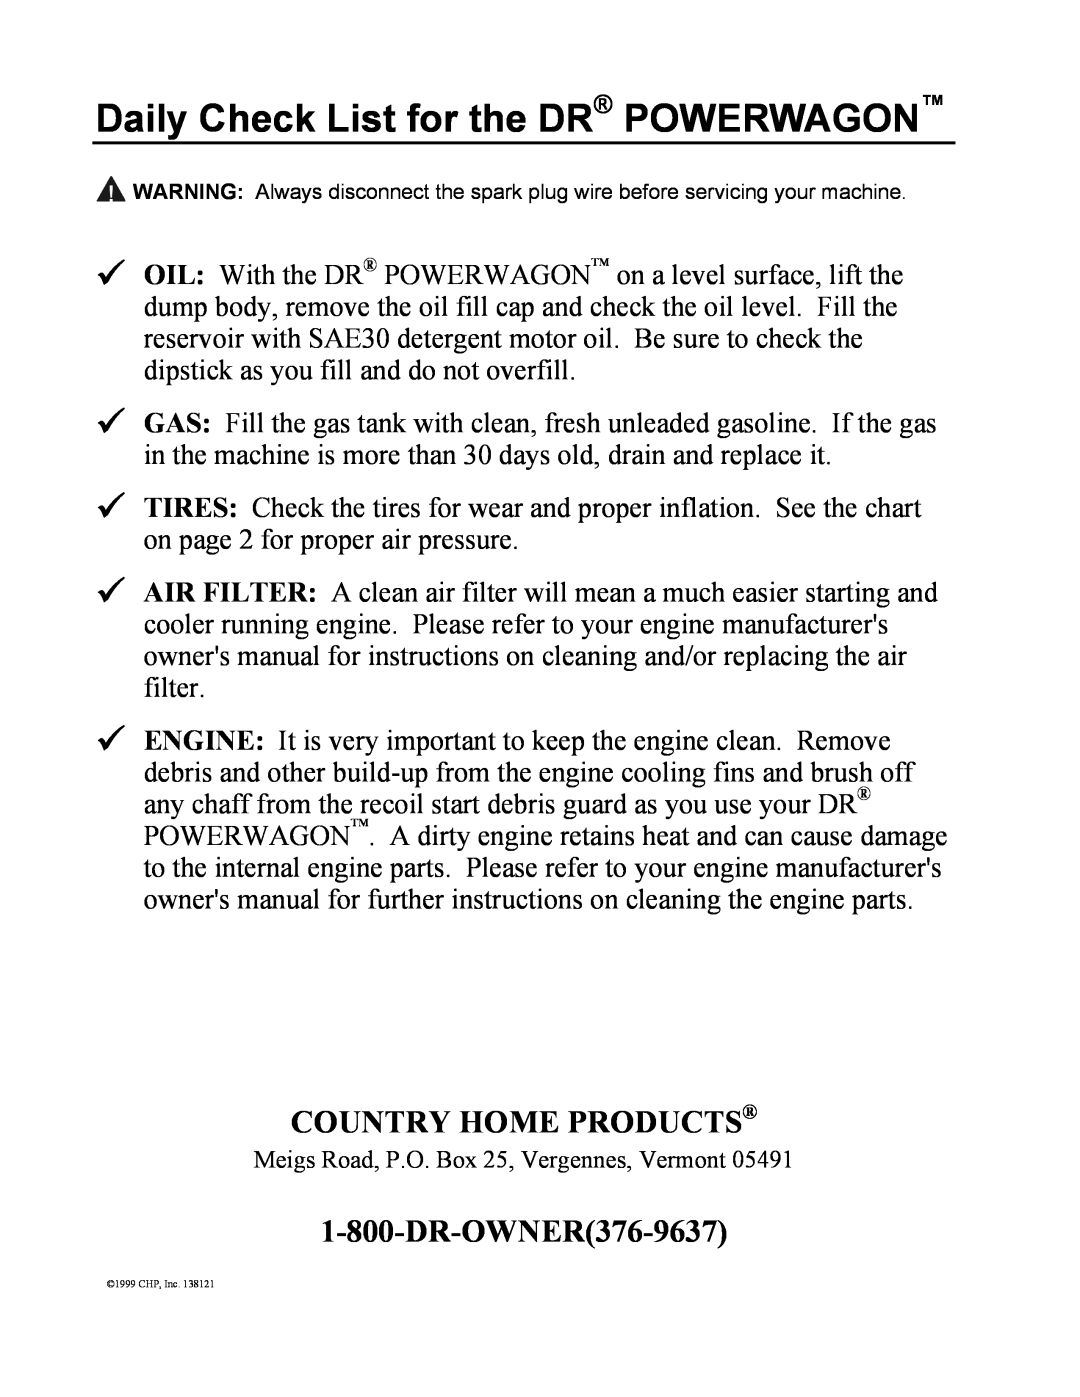 Country Home Products SUBURBANTM Daily Check List for the DR POWERWAGON, Country Home Products, DR-OWNER376-9637 